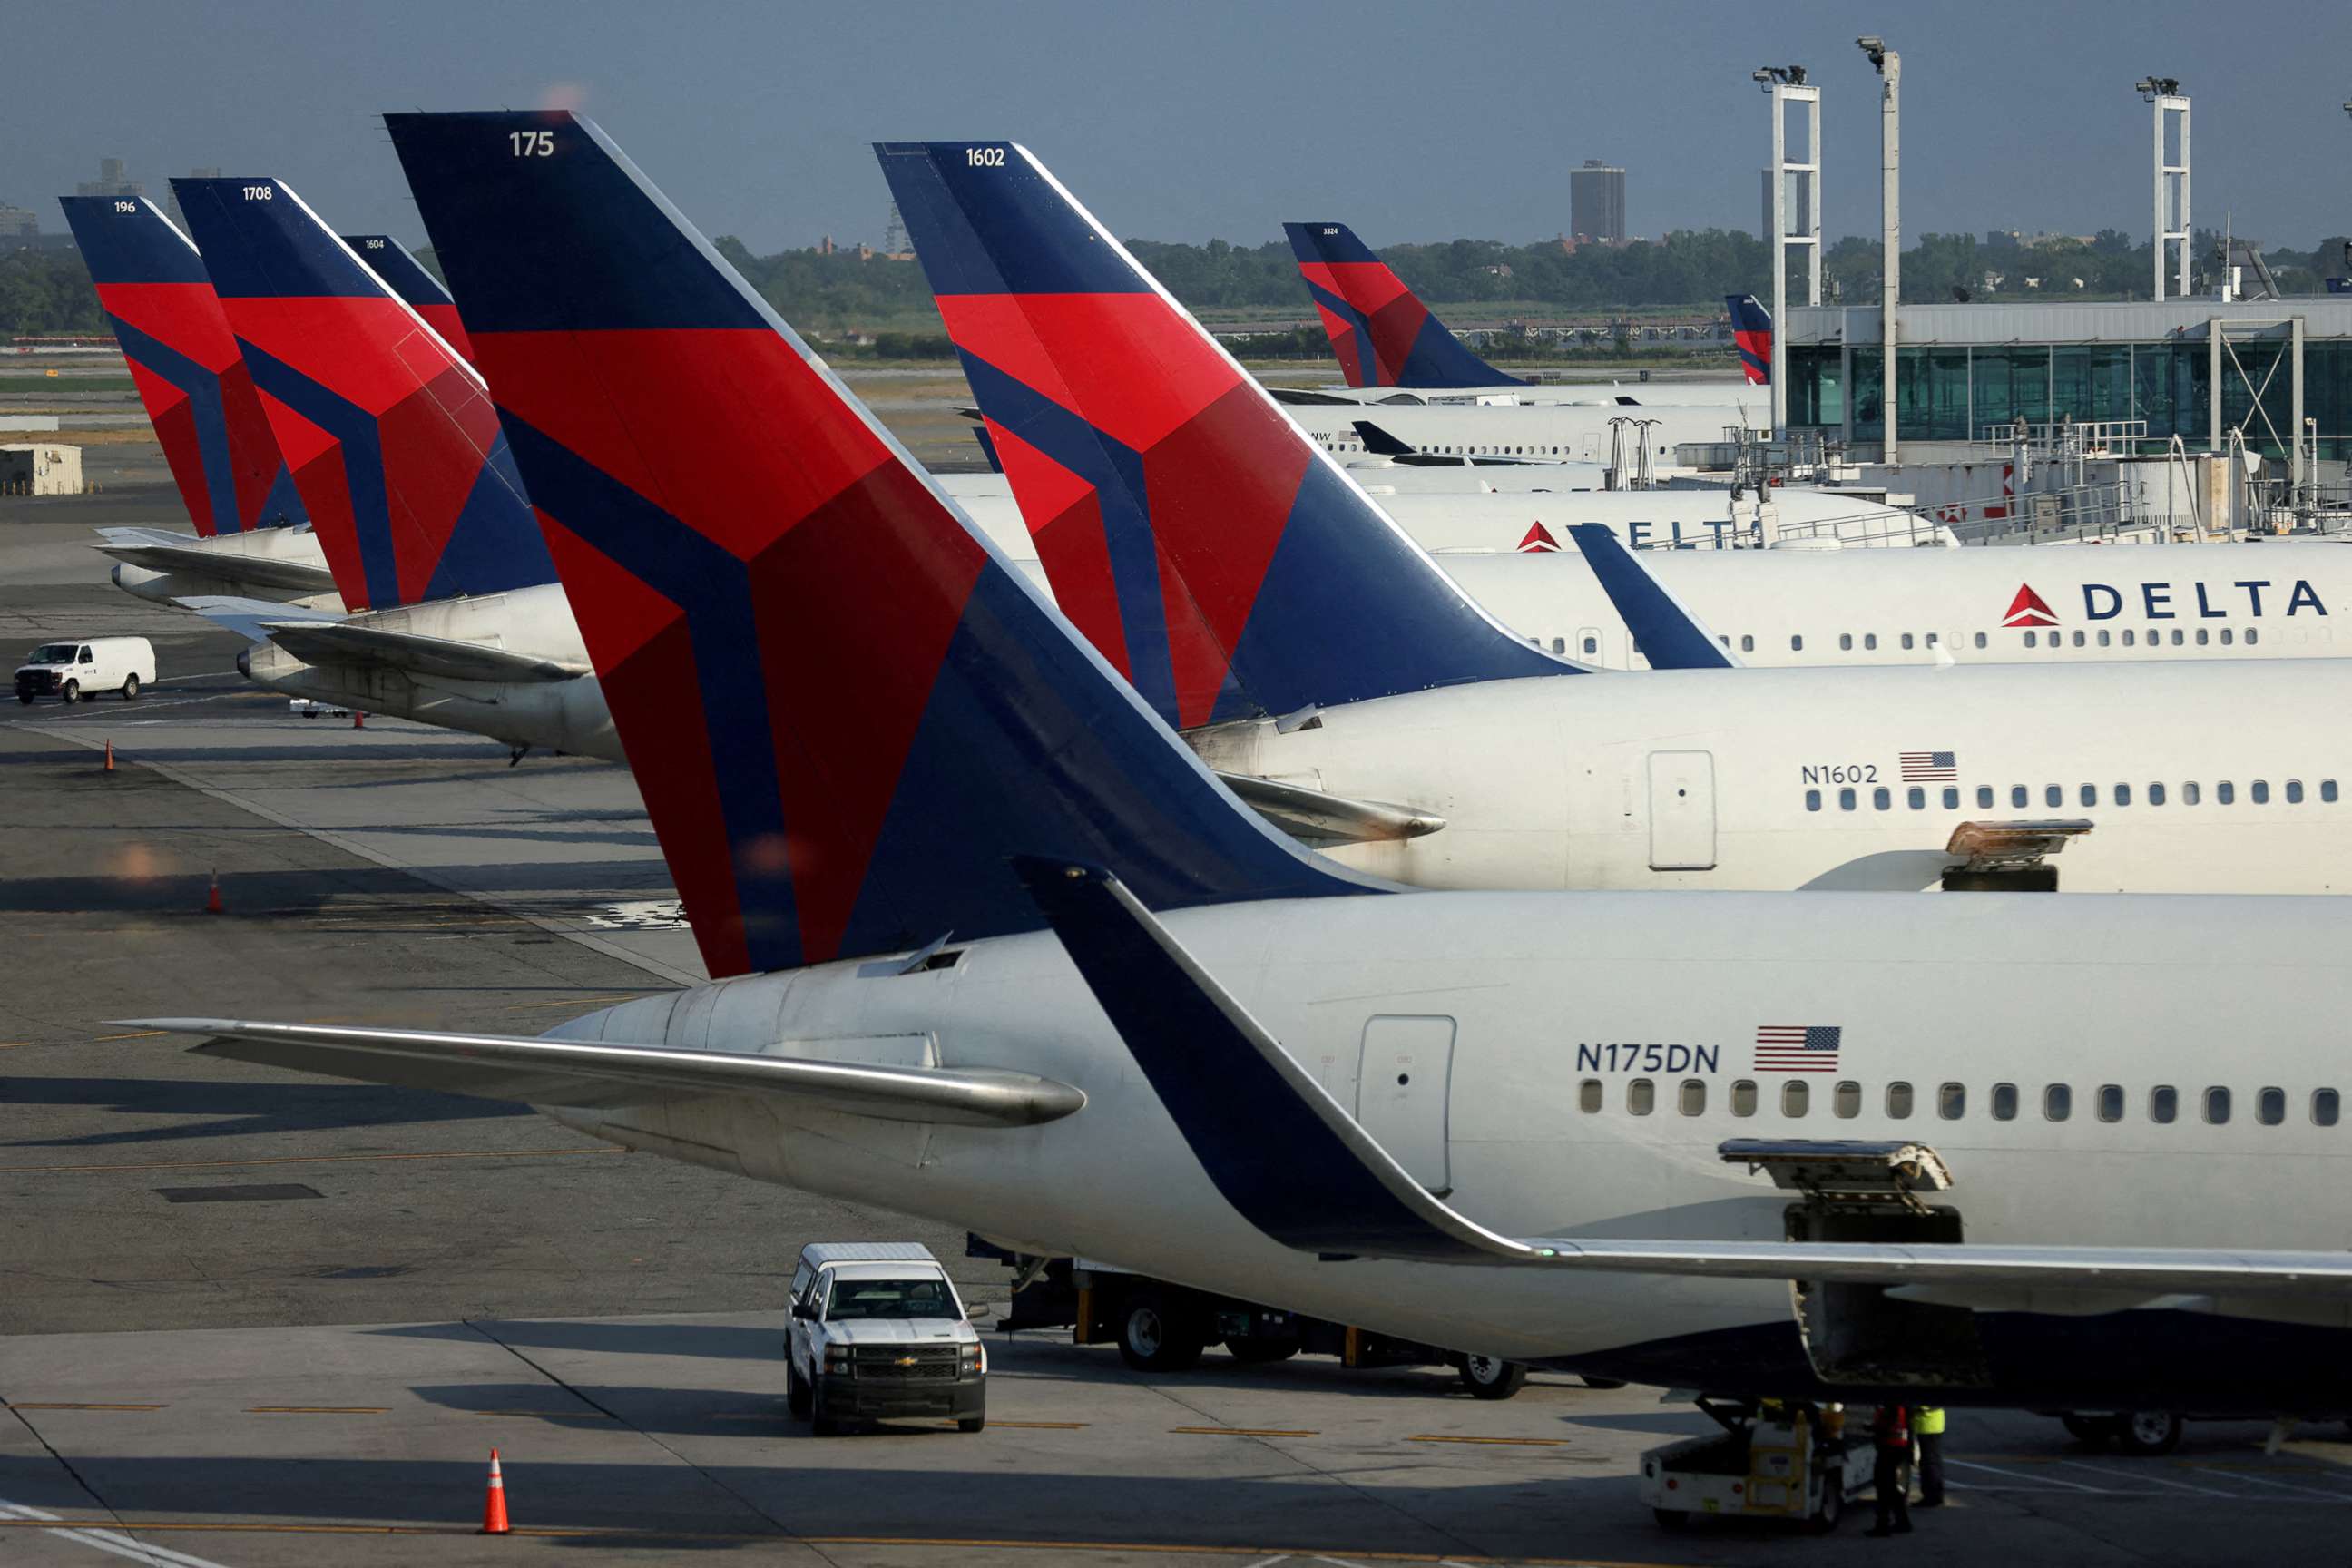 PHOTO: Delta Air Lines planes are seen at John F. Kennedy International Airport on the July 4th weekend in Queens, New York, on July 2, 2022.